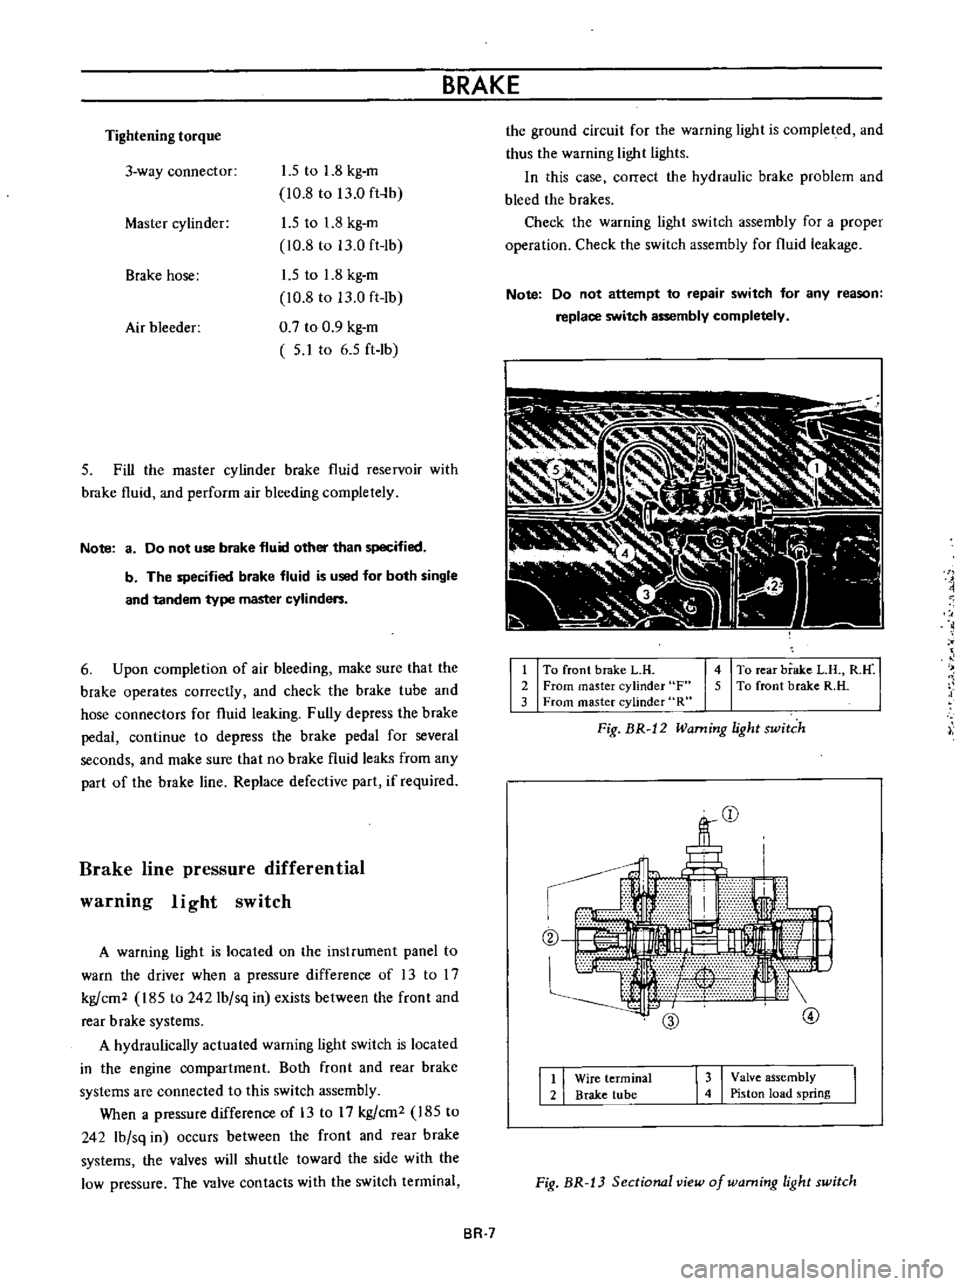 DATSUN B110 1973  Service User Guide 
Tightening 
torque

3

way 
connector 
1 
5

to 
1 
8

kg 
m

10
8 
to 
13 
0 
ft
lh

1
5 
to 
1 
8

kg 
m

10

8 
to 
13

0 
ft

lh

1
5 
to 
1 
8

kg 
m

10

8 
to 
13

0 
ft

lb

0

7 
to 
0 
9

k